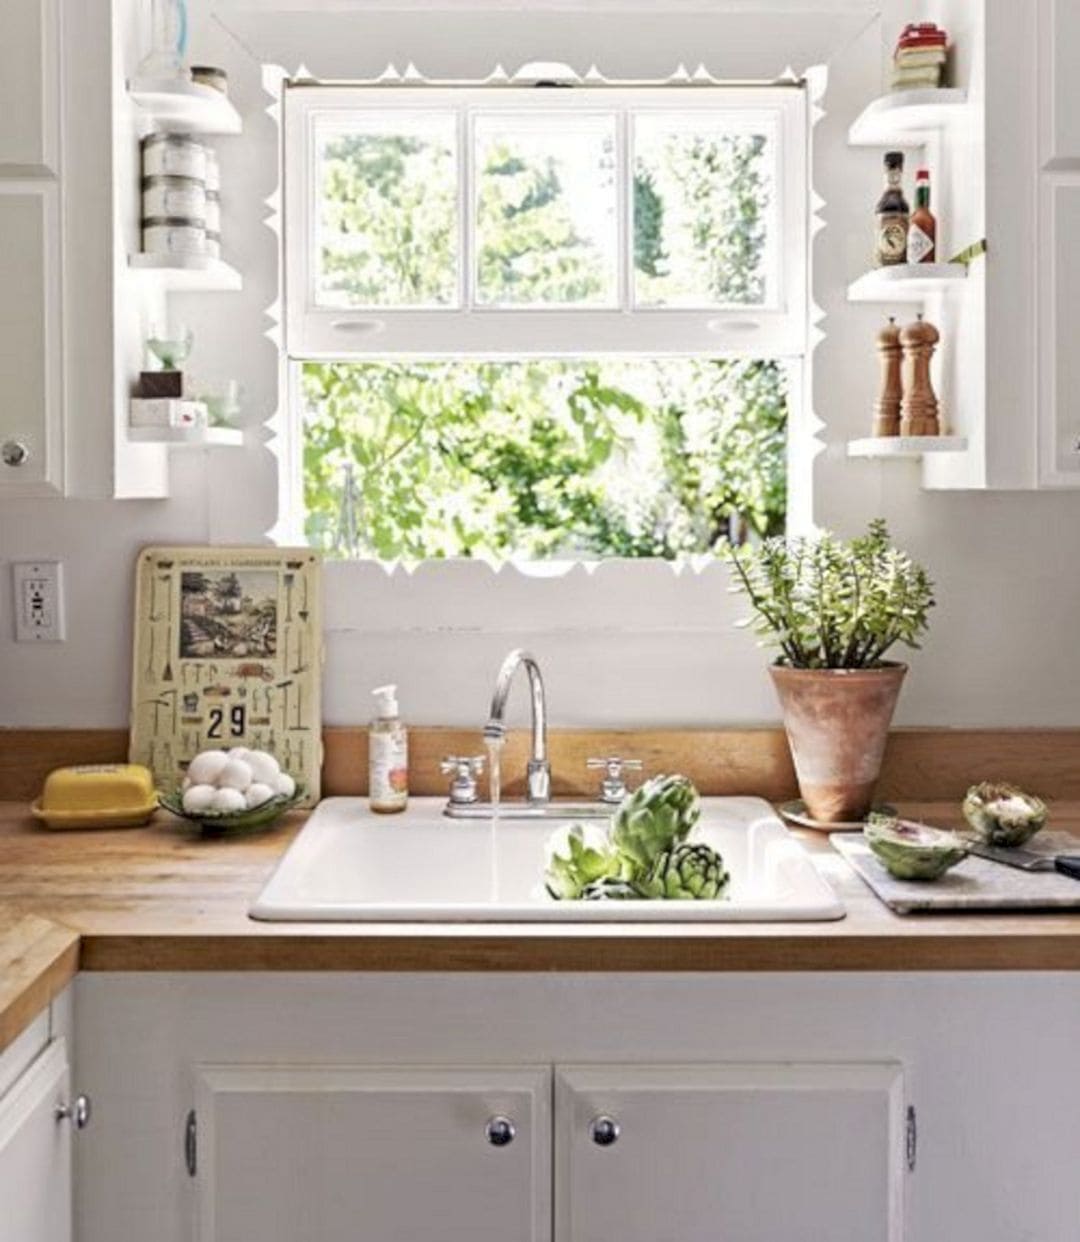 25 creative kitchen window decorating ideas you'll fall for - 79